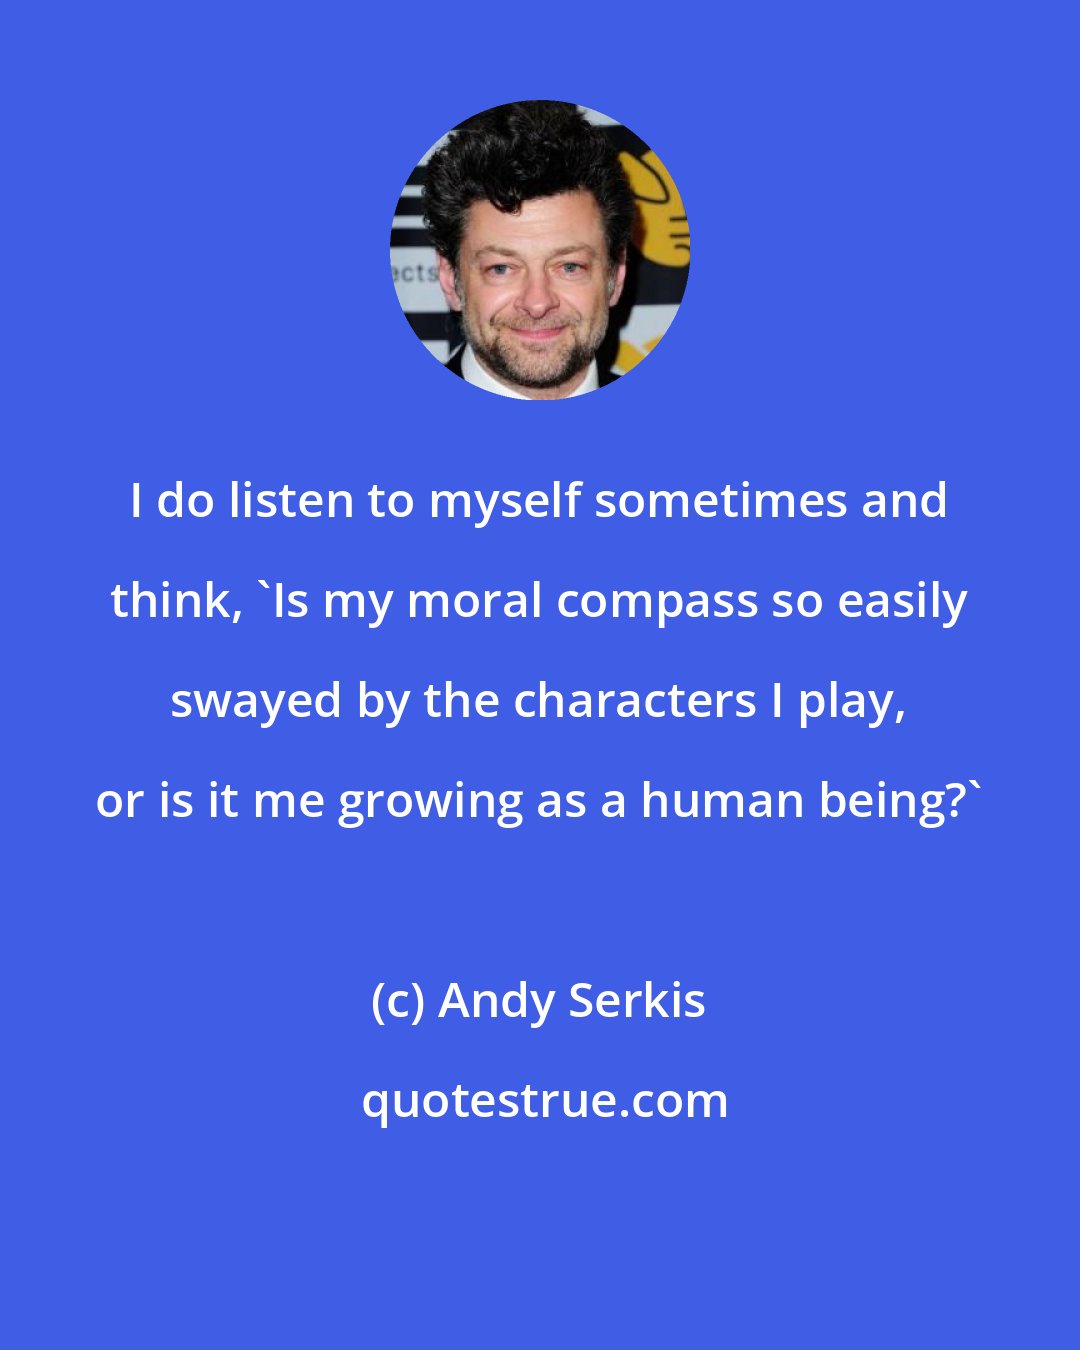 Andy Serkis: I do listen to myself sometimes and think, 'Is my moral compass so easily swayed by the characters I play, or is it me growing as a human being?'